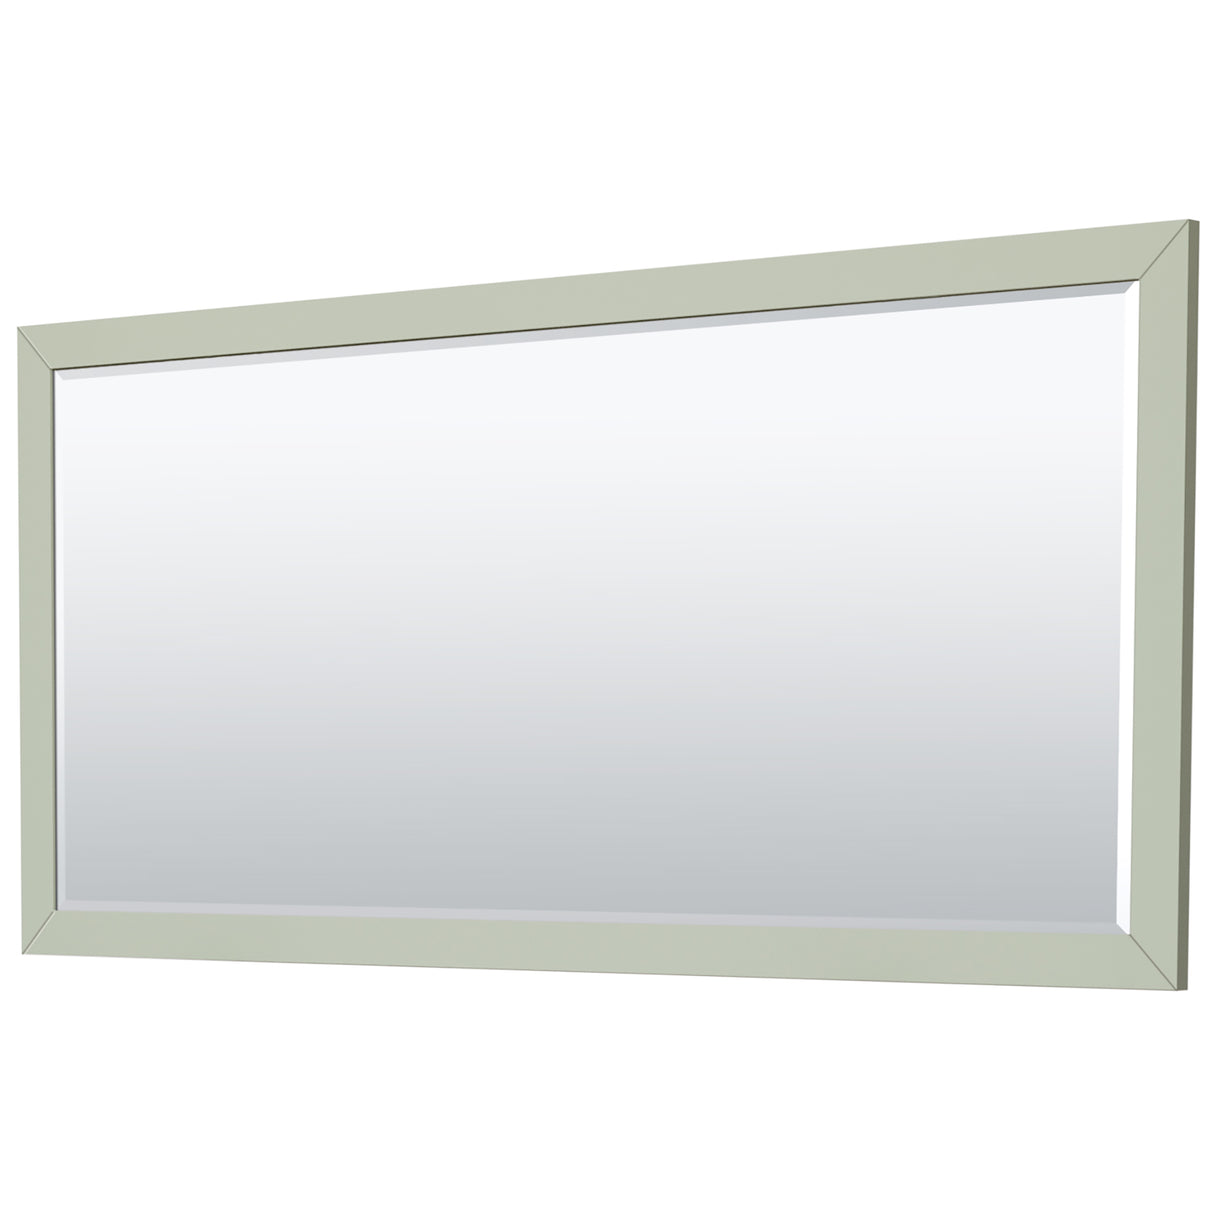 Icon 72 Inch Double Bathroom Vanity in Light Green Carrara Cultured Marble Countertop Undermount Square Sinks Brushed Nickel Trim 70 Inch Mirror